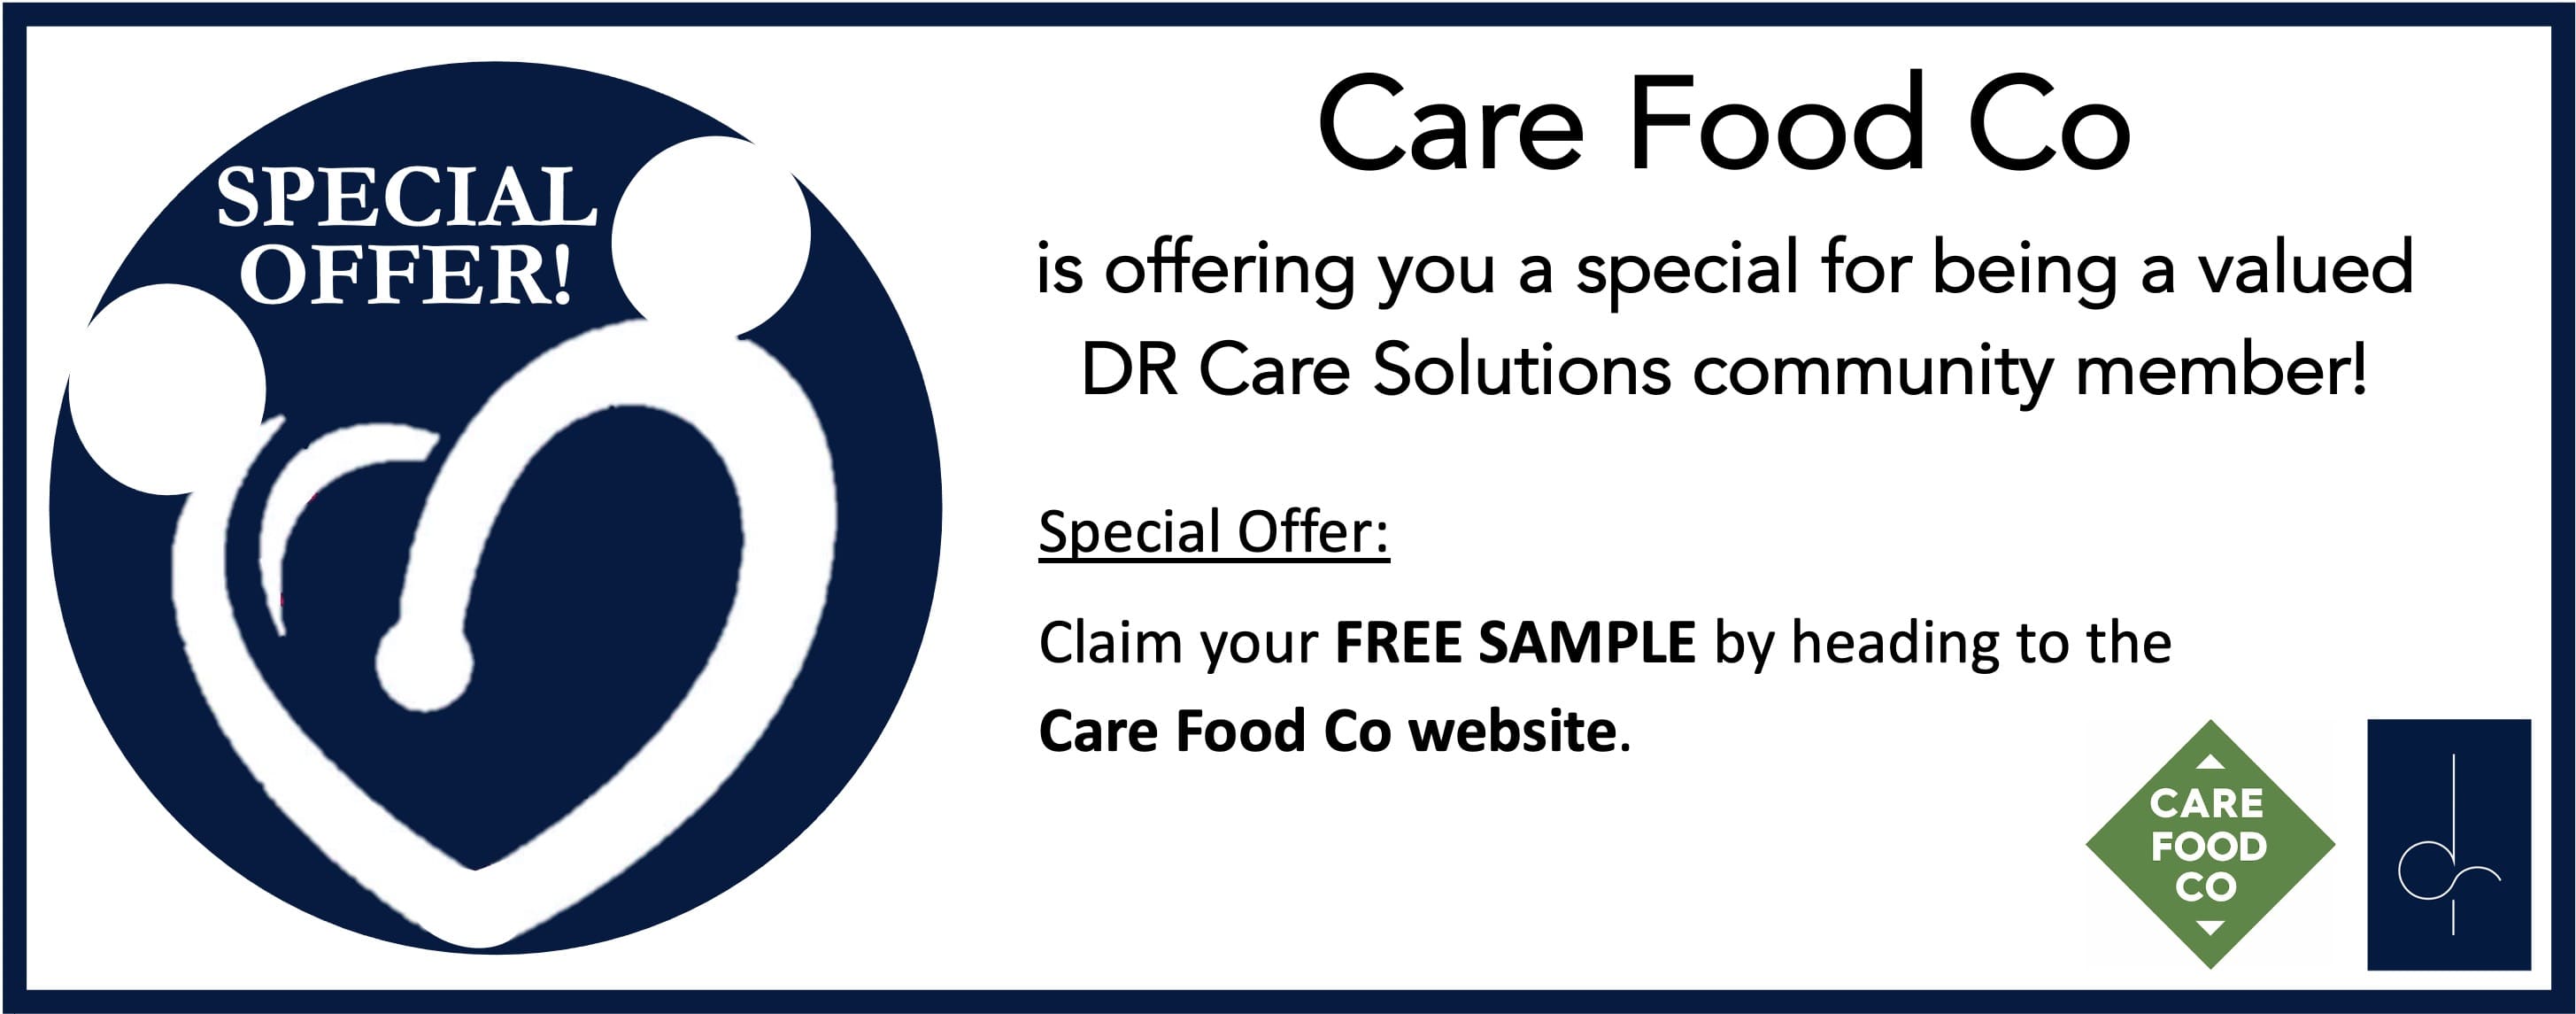 Care Food Co - Special Offer